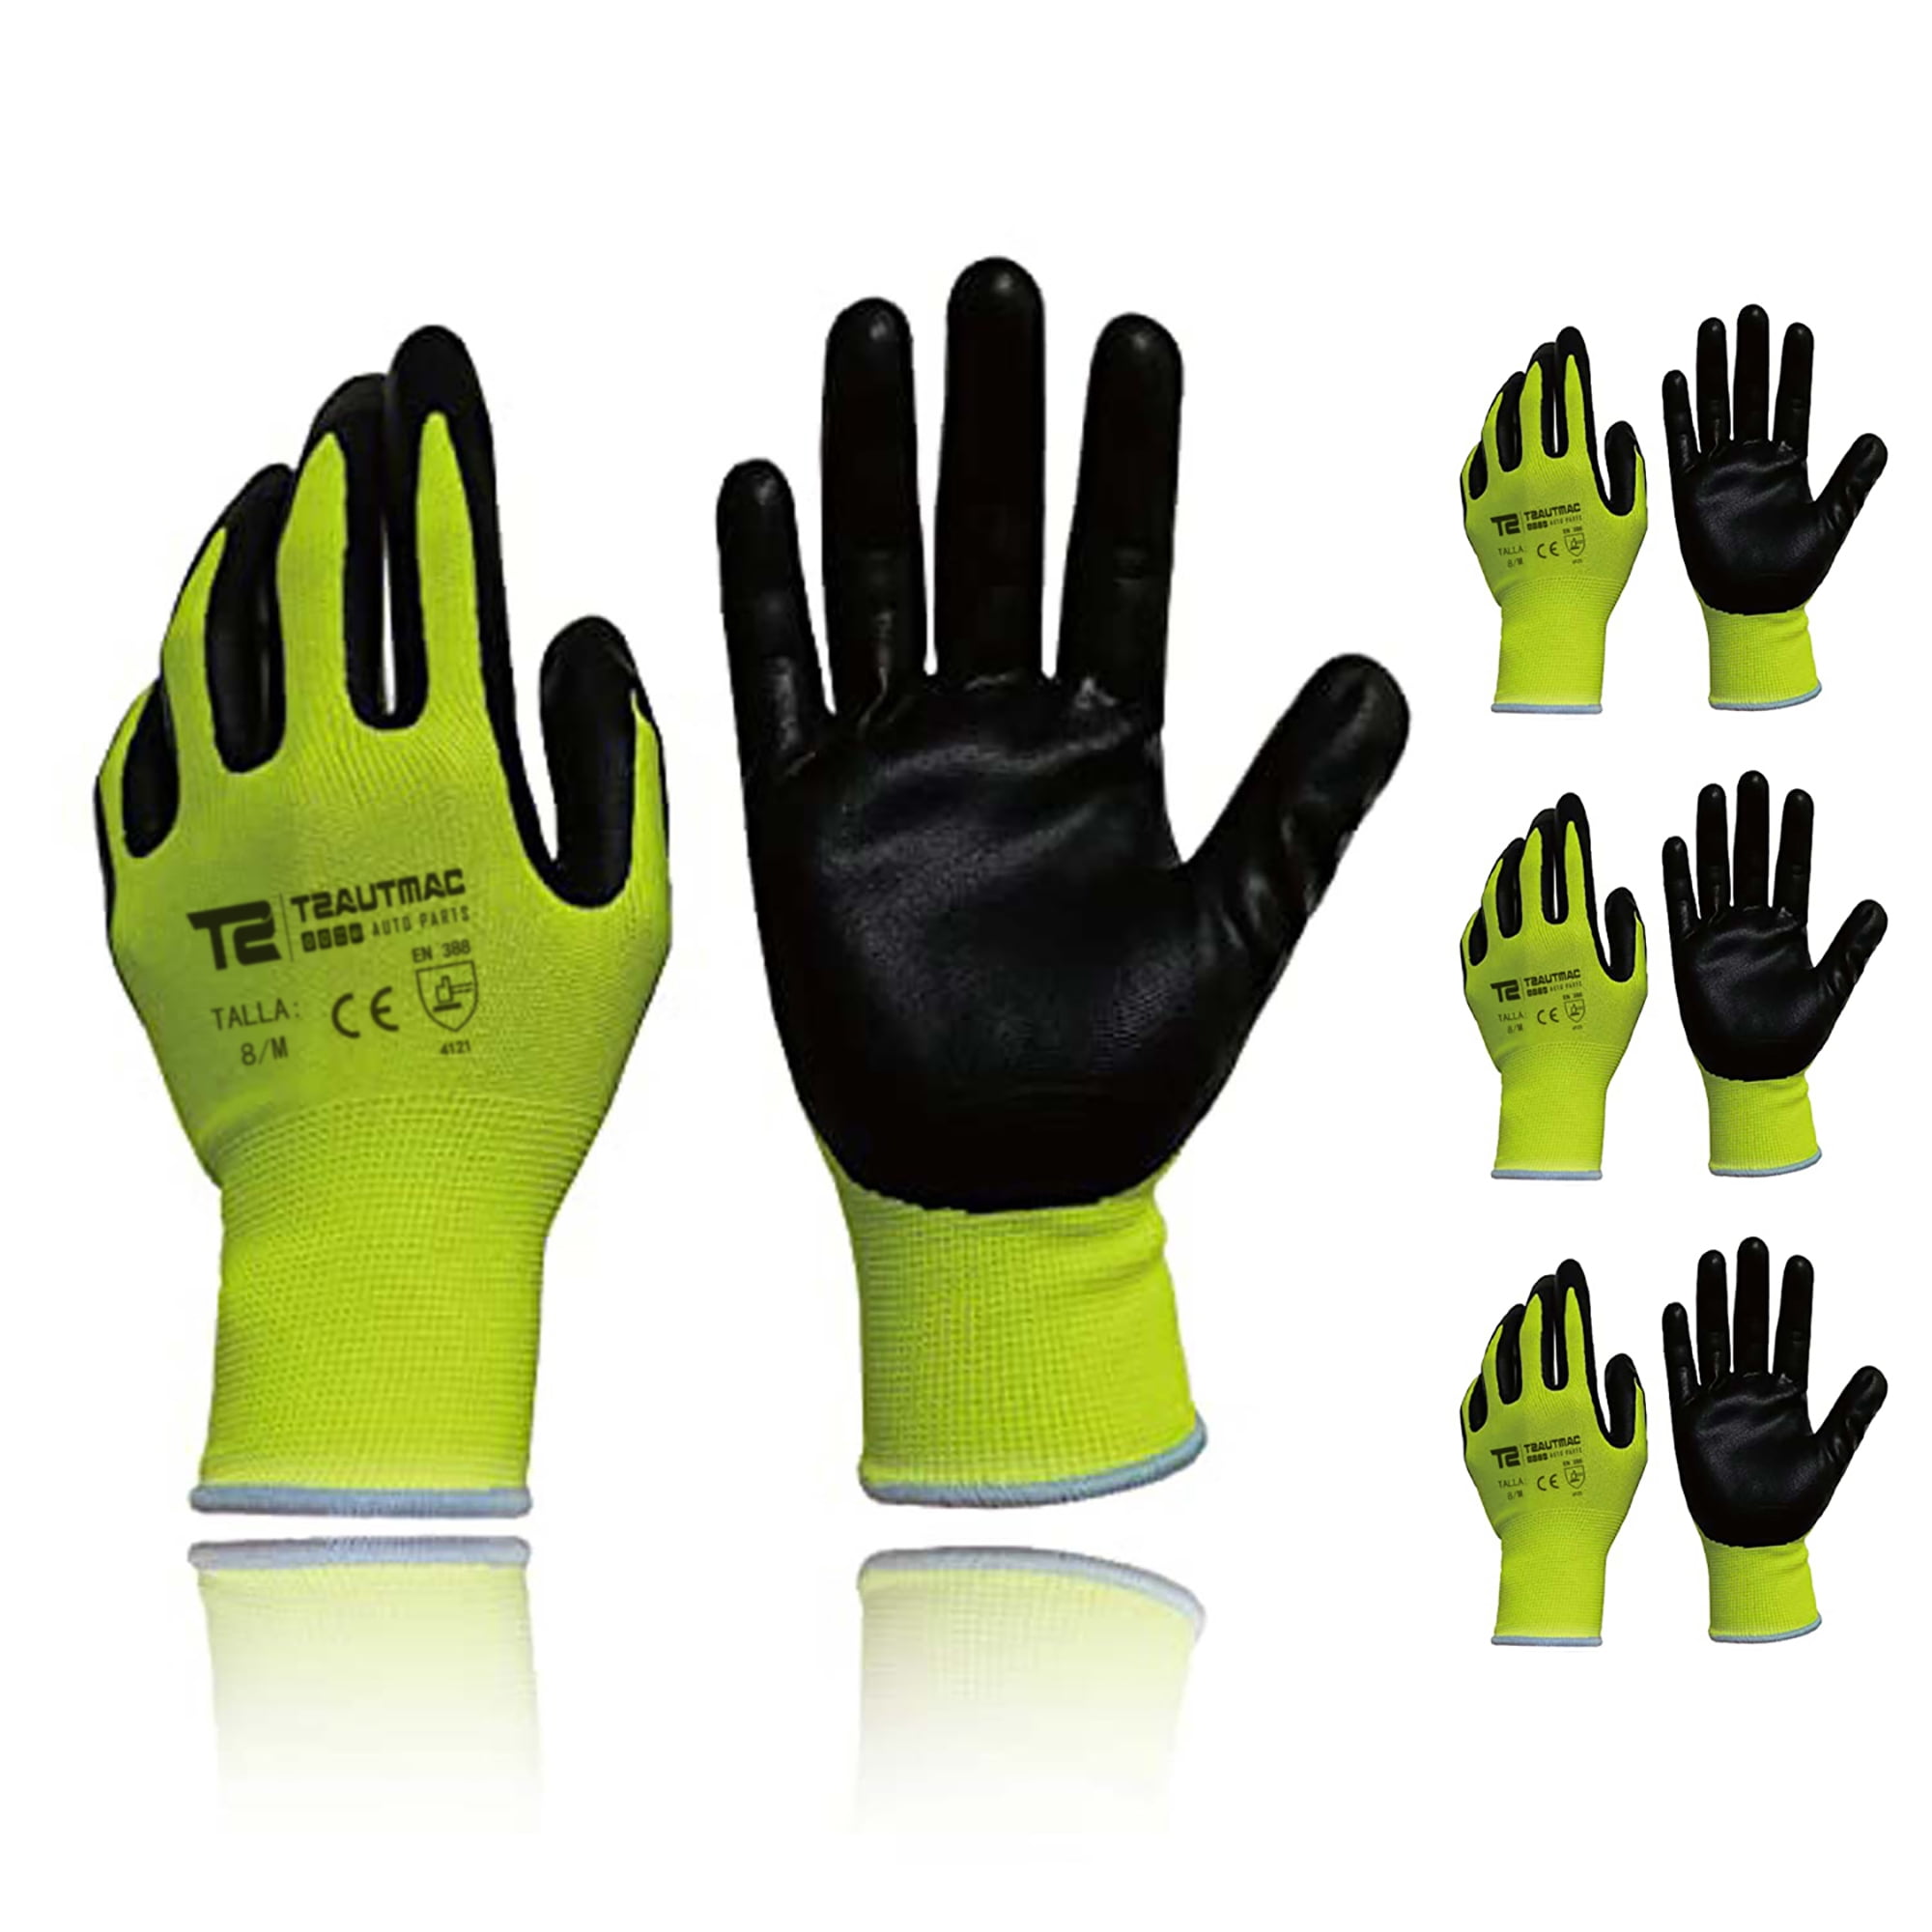 Lingvido Green Cut Proof Gloves,Level 5 Cut Non- slip Work Gloves with  Natural Latex Coating,6 PCS,Medium Size